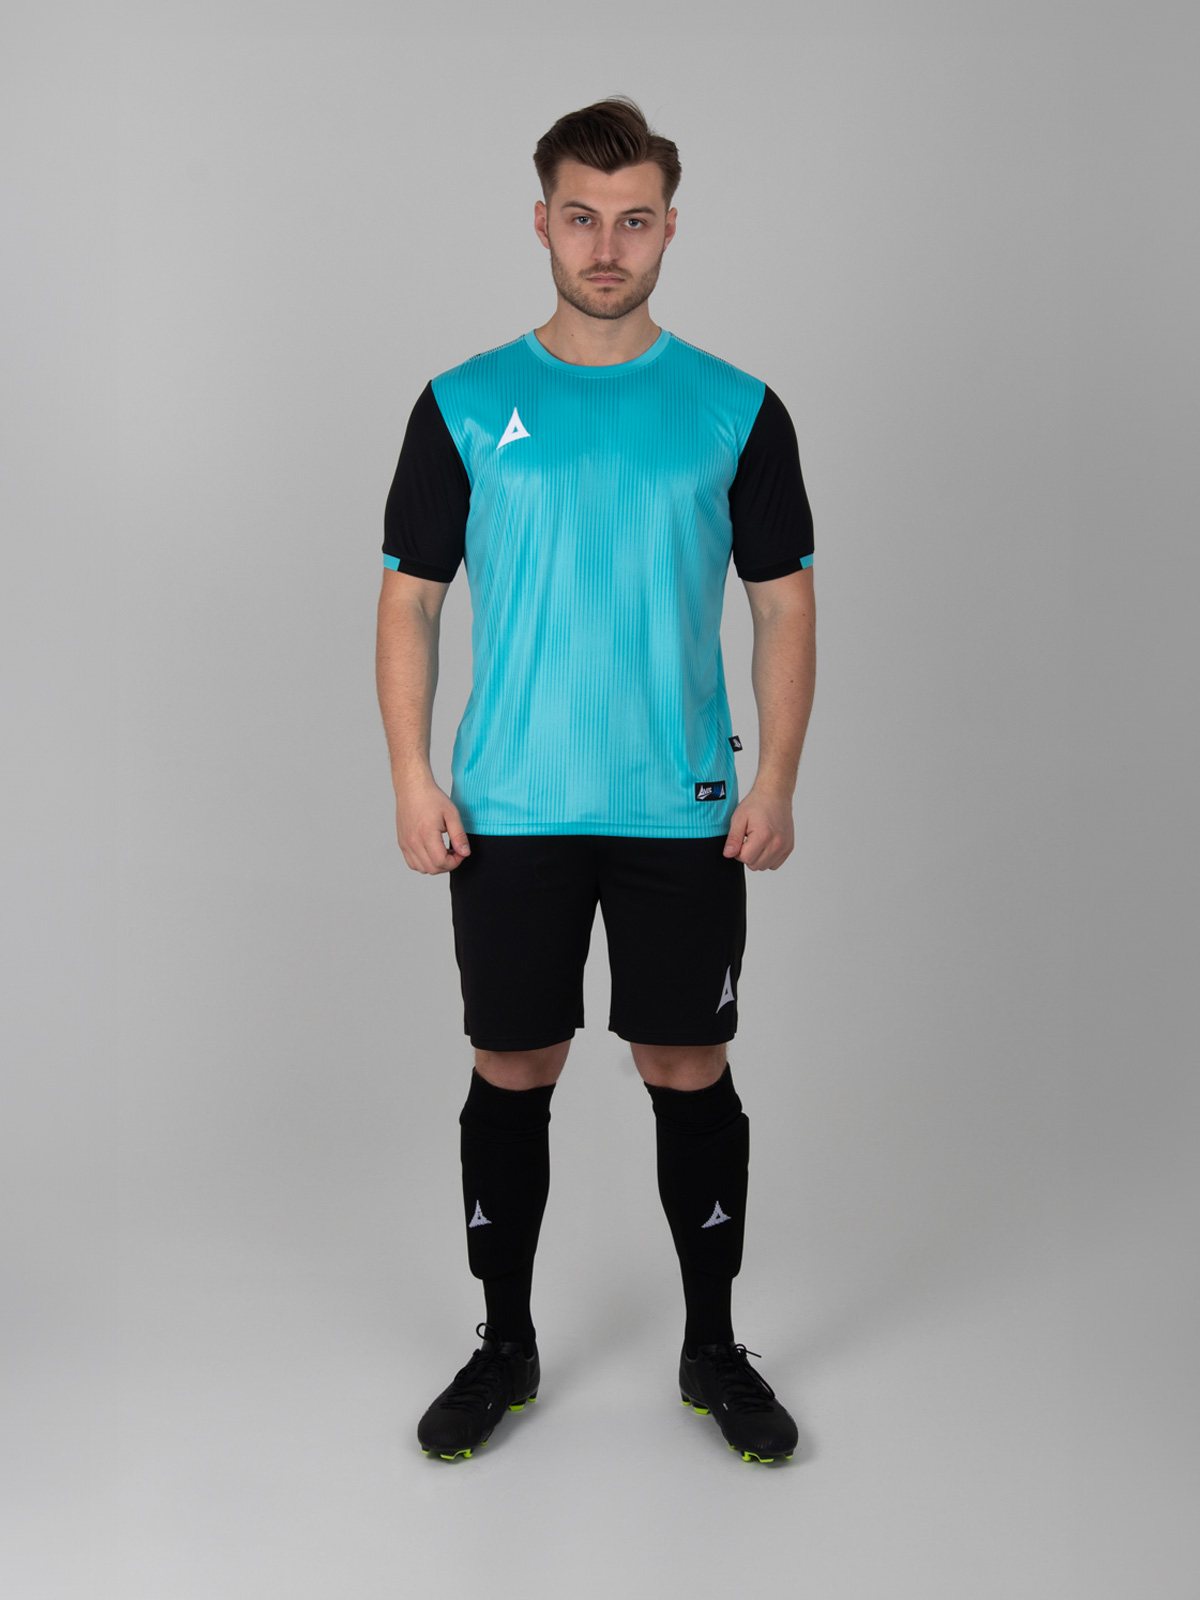 a male model wearing a light blue football shirt with a graphic print and black sleeves